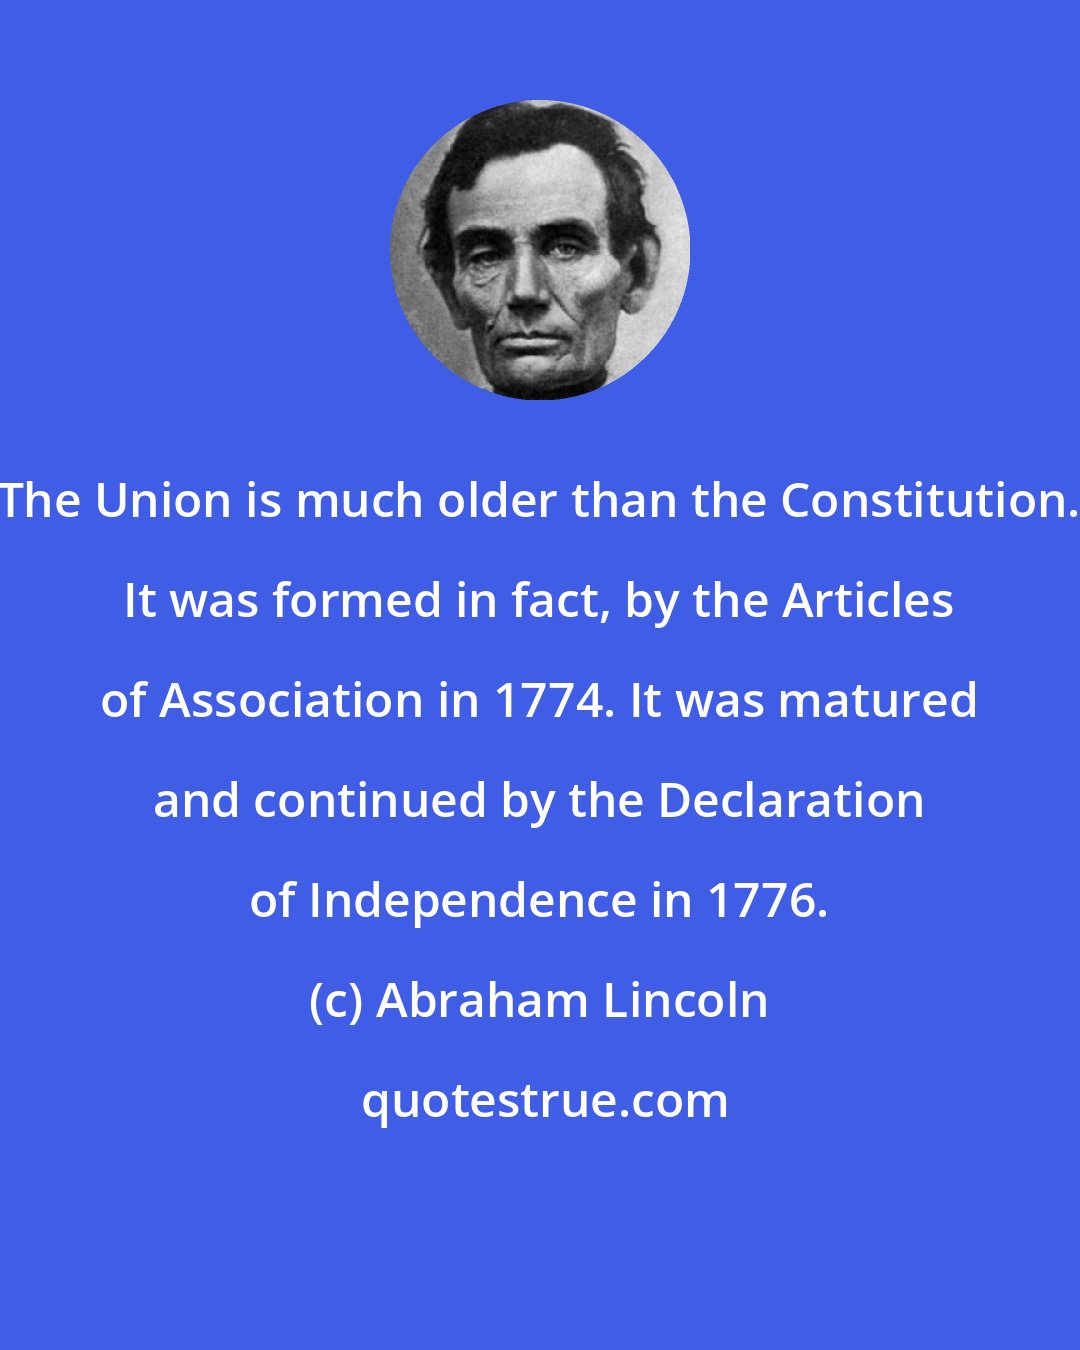 Abraham Lincoln: The Union is much older than the Constitution. It was formed in fact, by the Articles of Association in 1774. It was matured and continued by the Declaration of Independence in 1776.